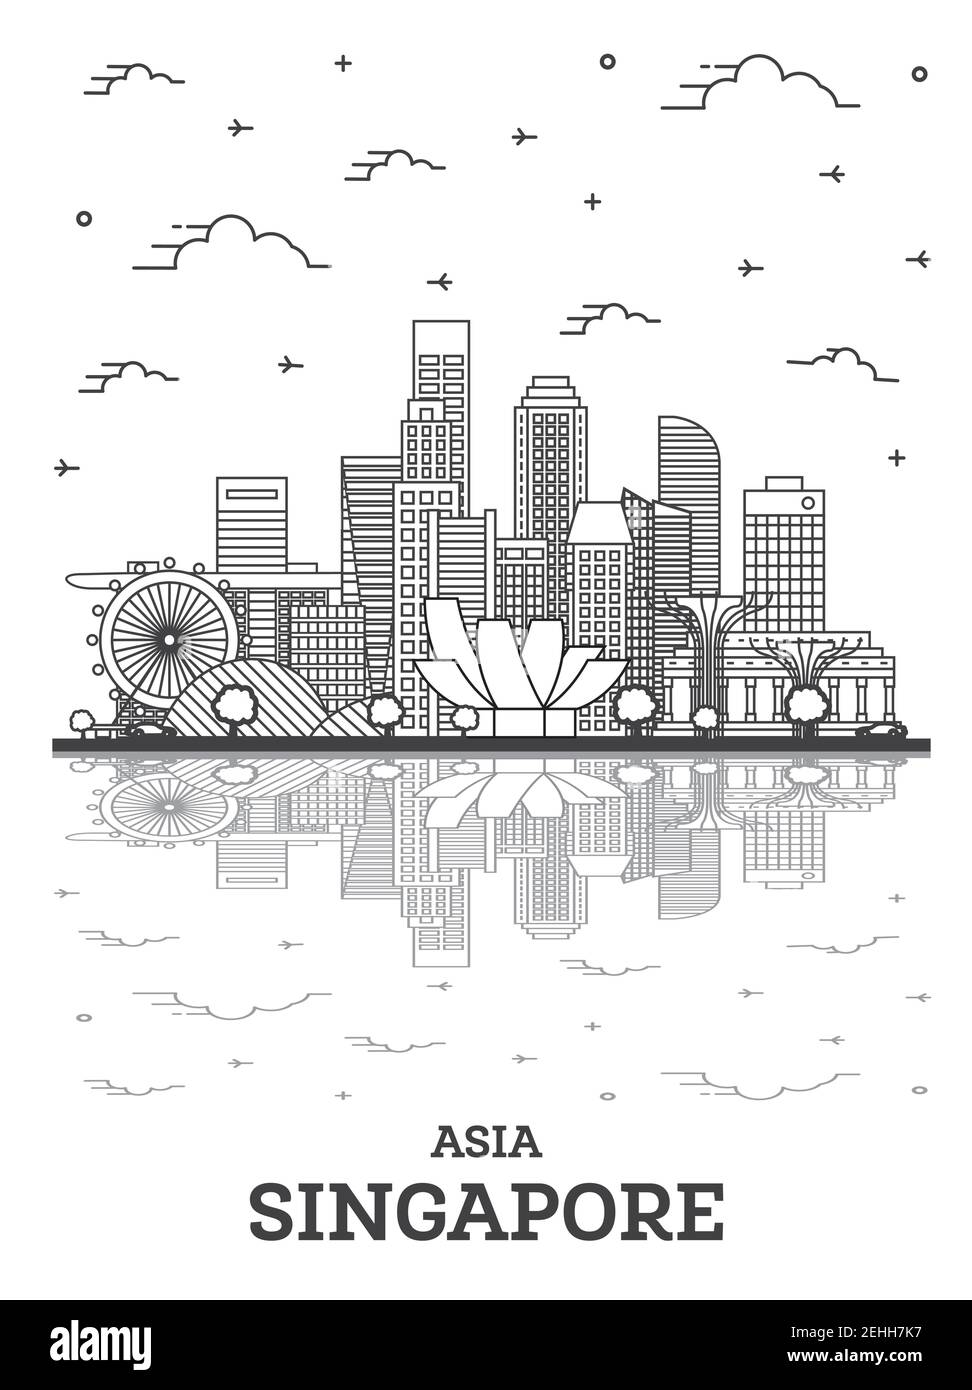 Outline Singapore City Skyline with Modern Buildings and Reflections Isolated on White. Vector Illustration. Singapore Cityscape with Landmarks. Stock Vector